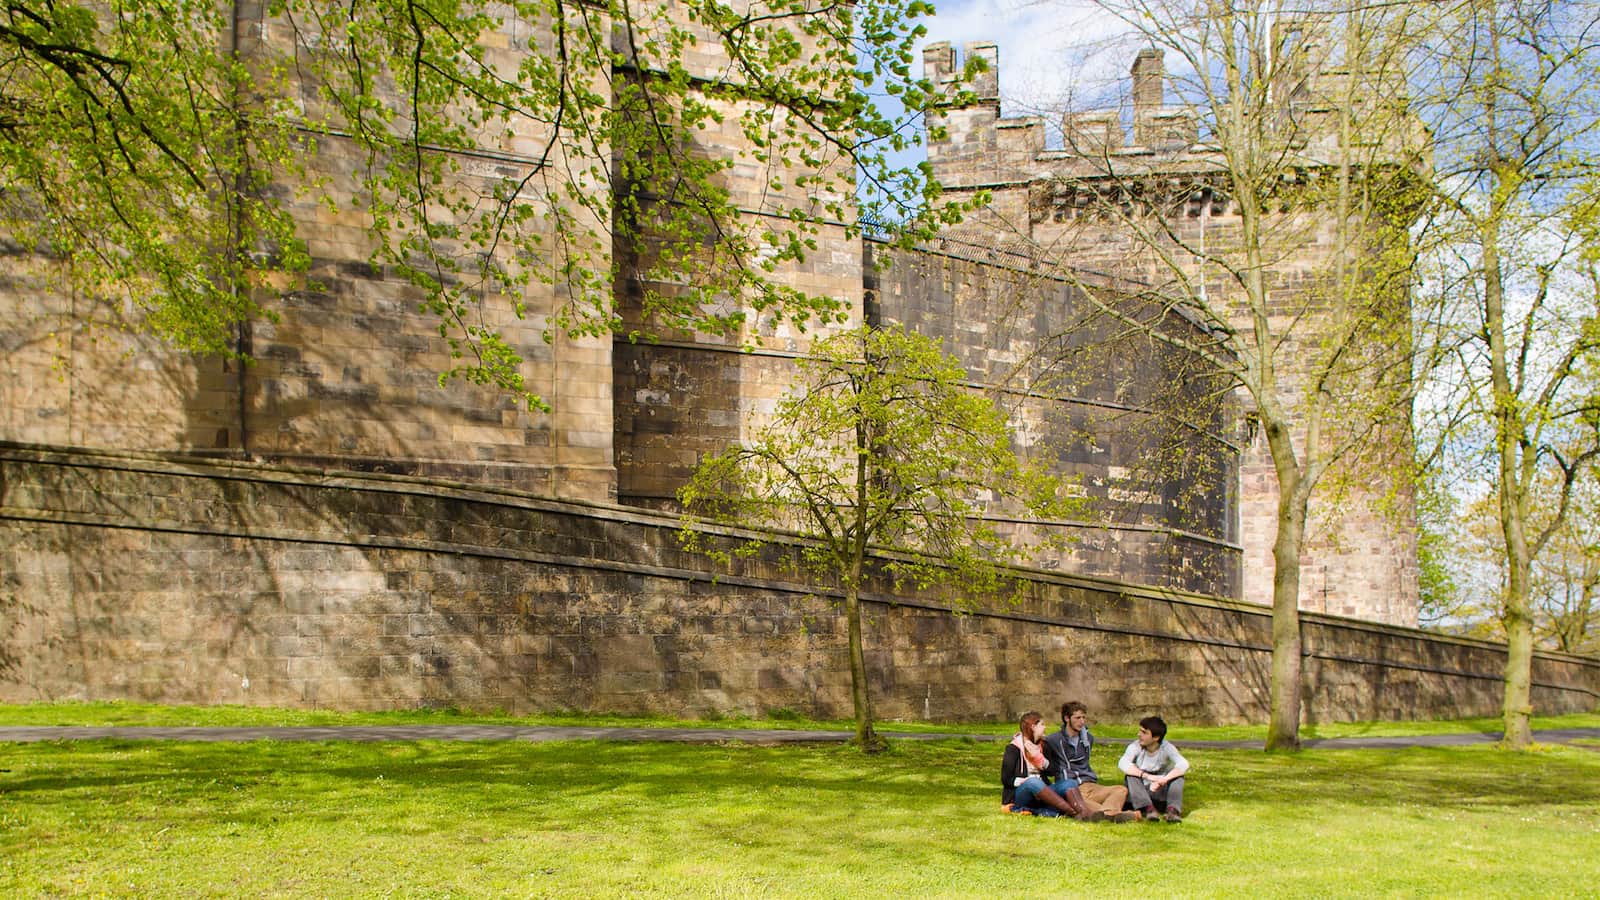 Students sit on the grass outside the walls of СʪƵ Castle